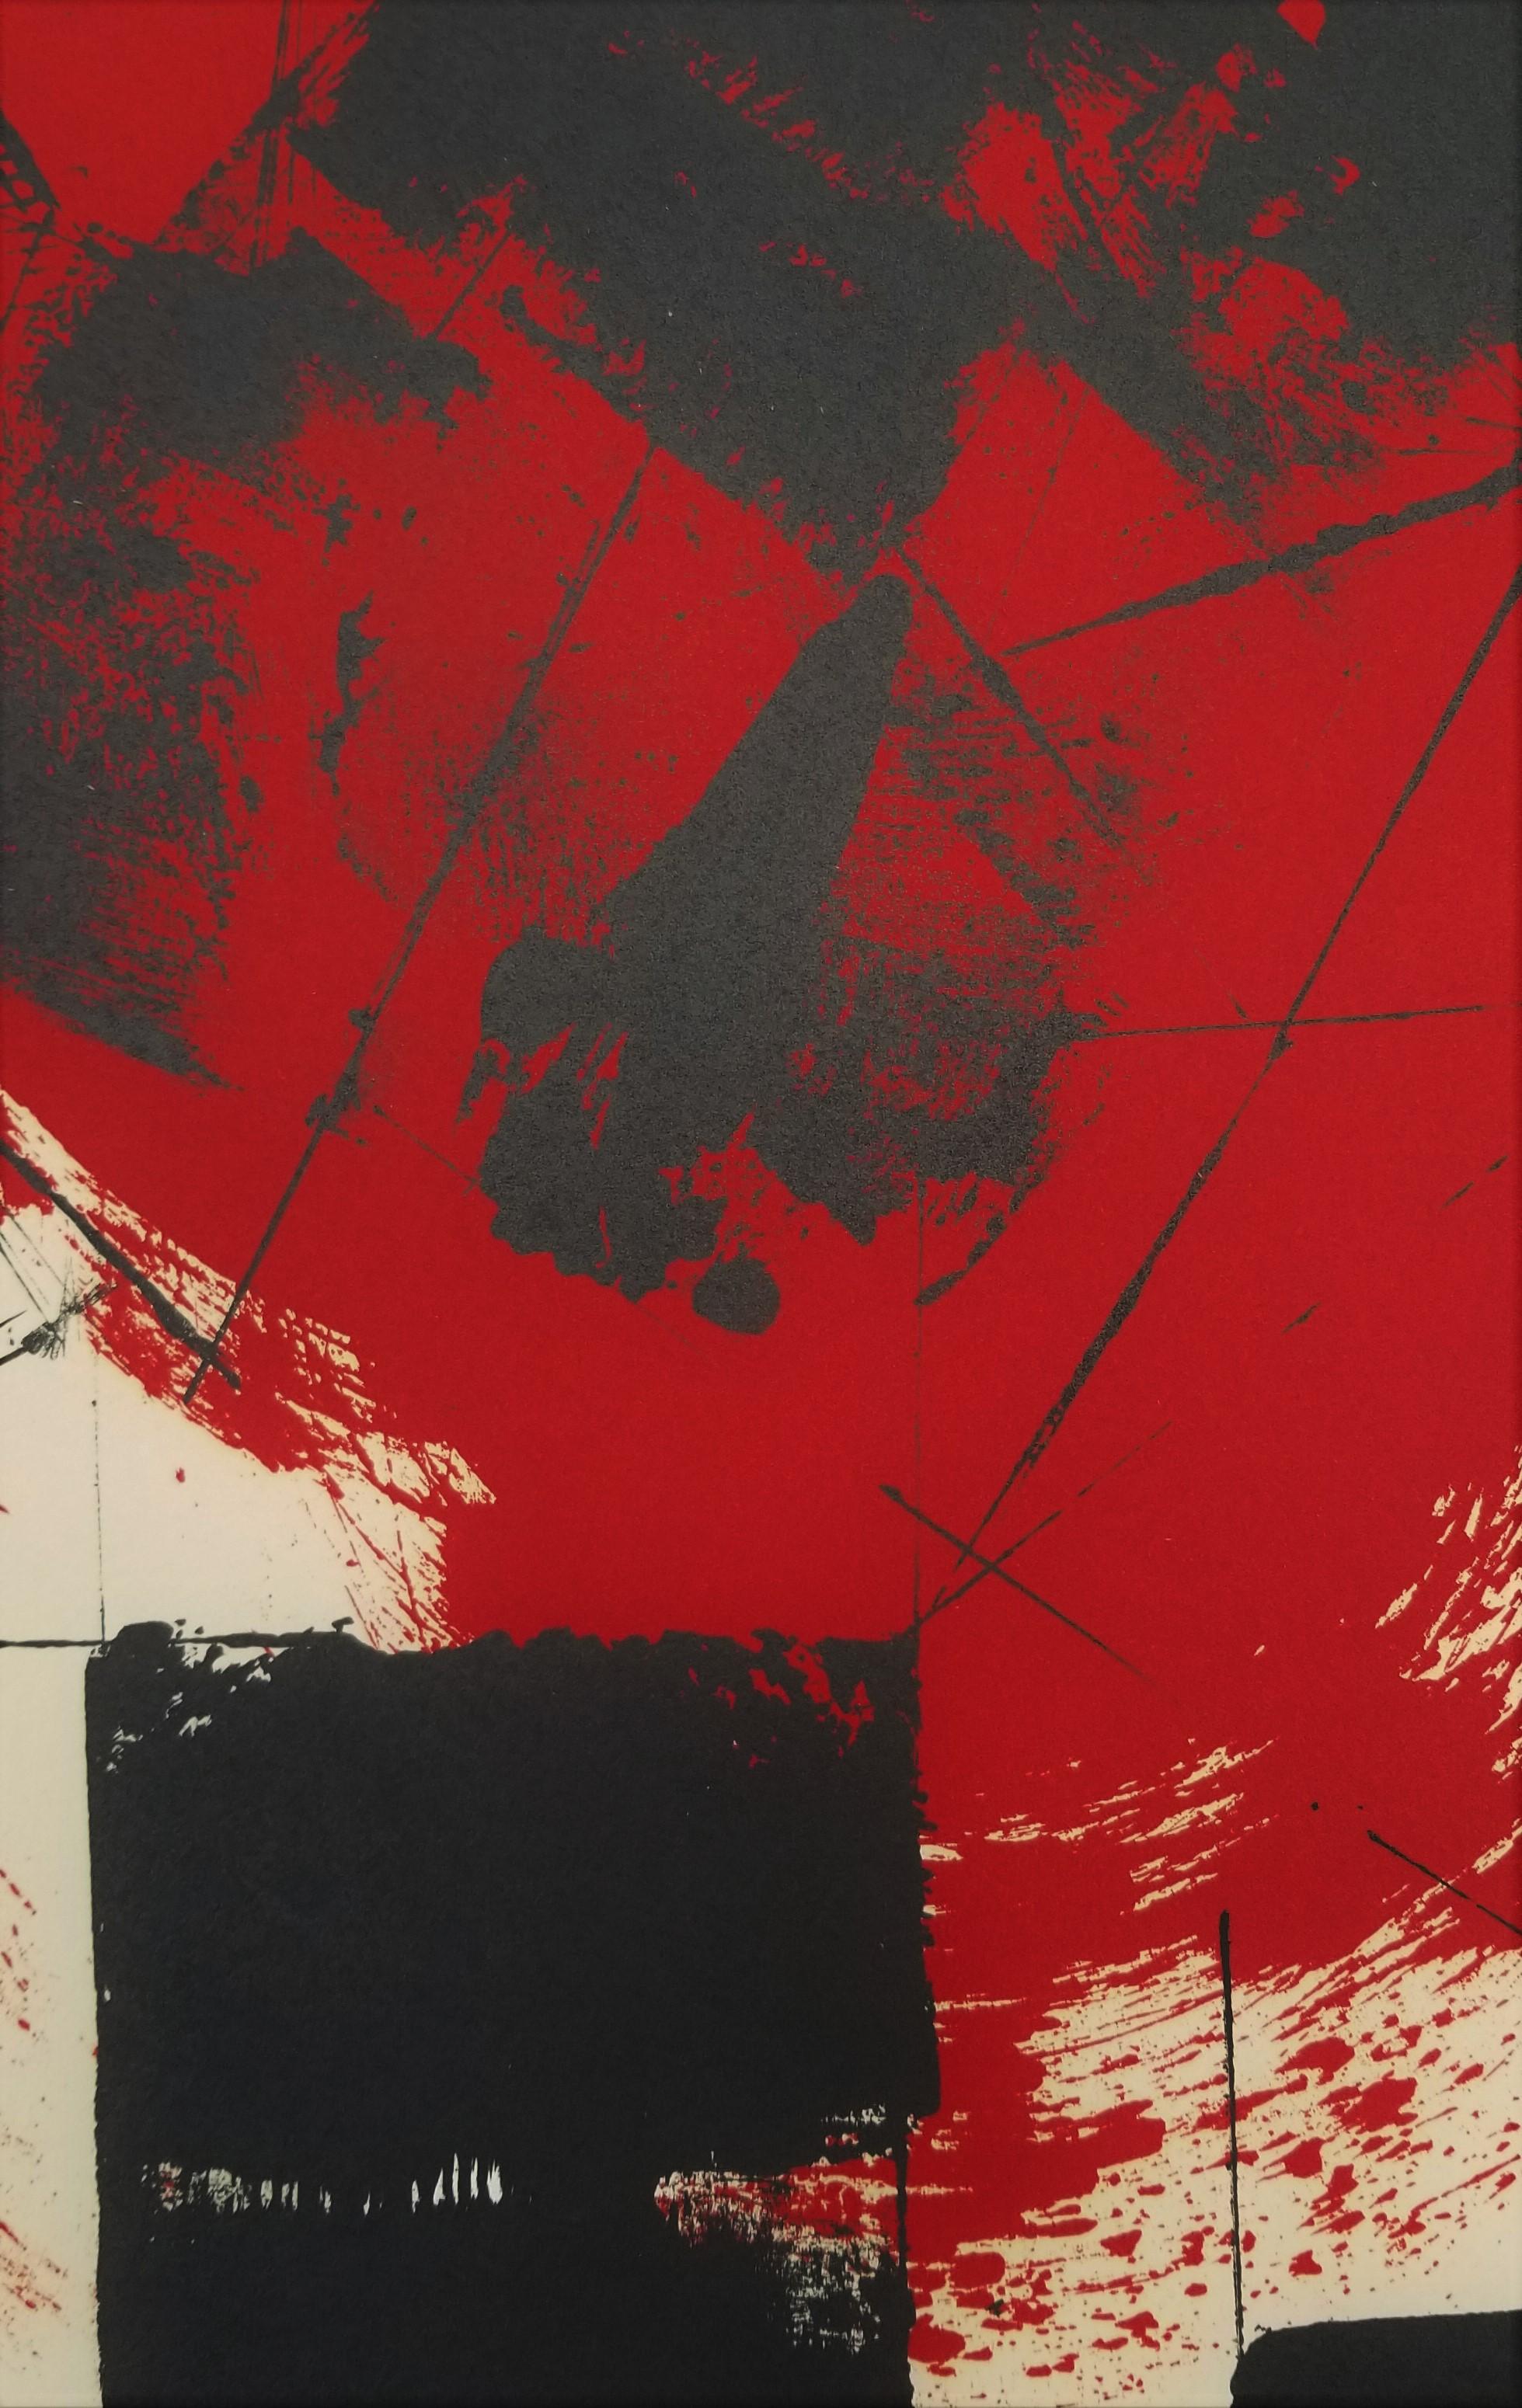 Red and Black II /// Abstract Expressionist Lynn Chadwick British Minimalism Art For Sale 8